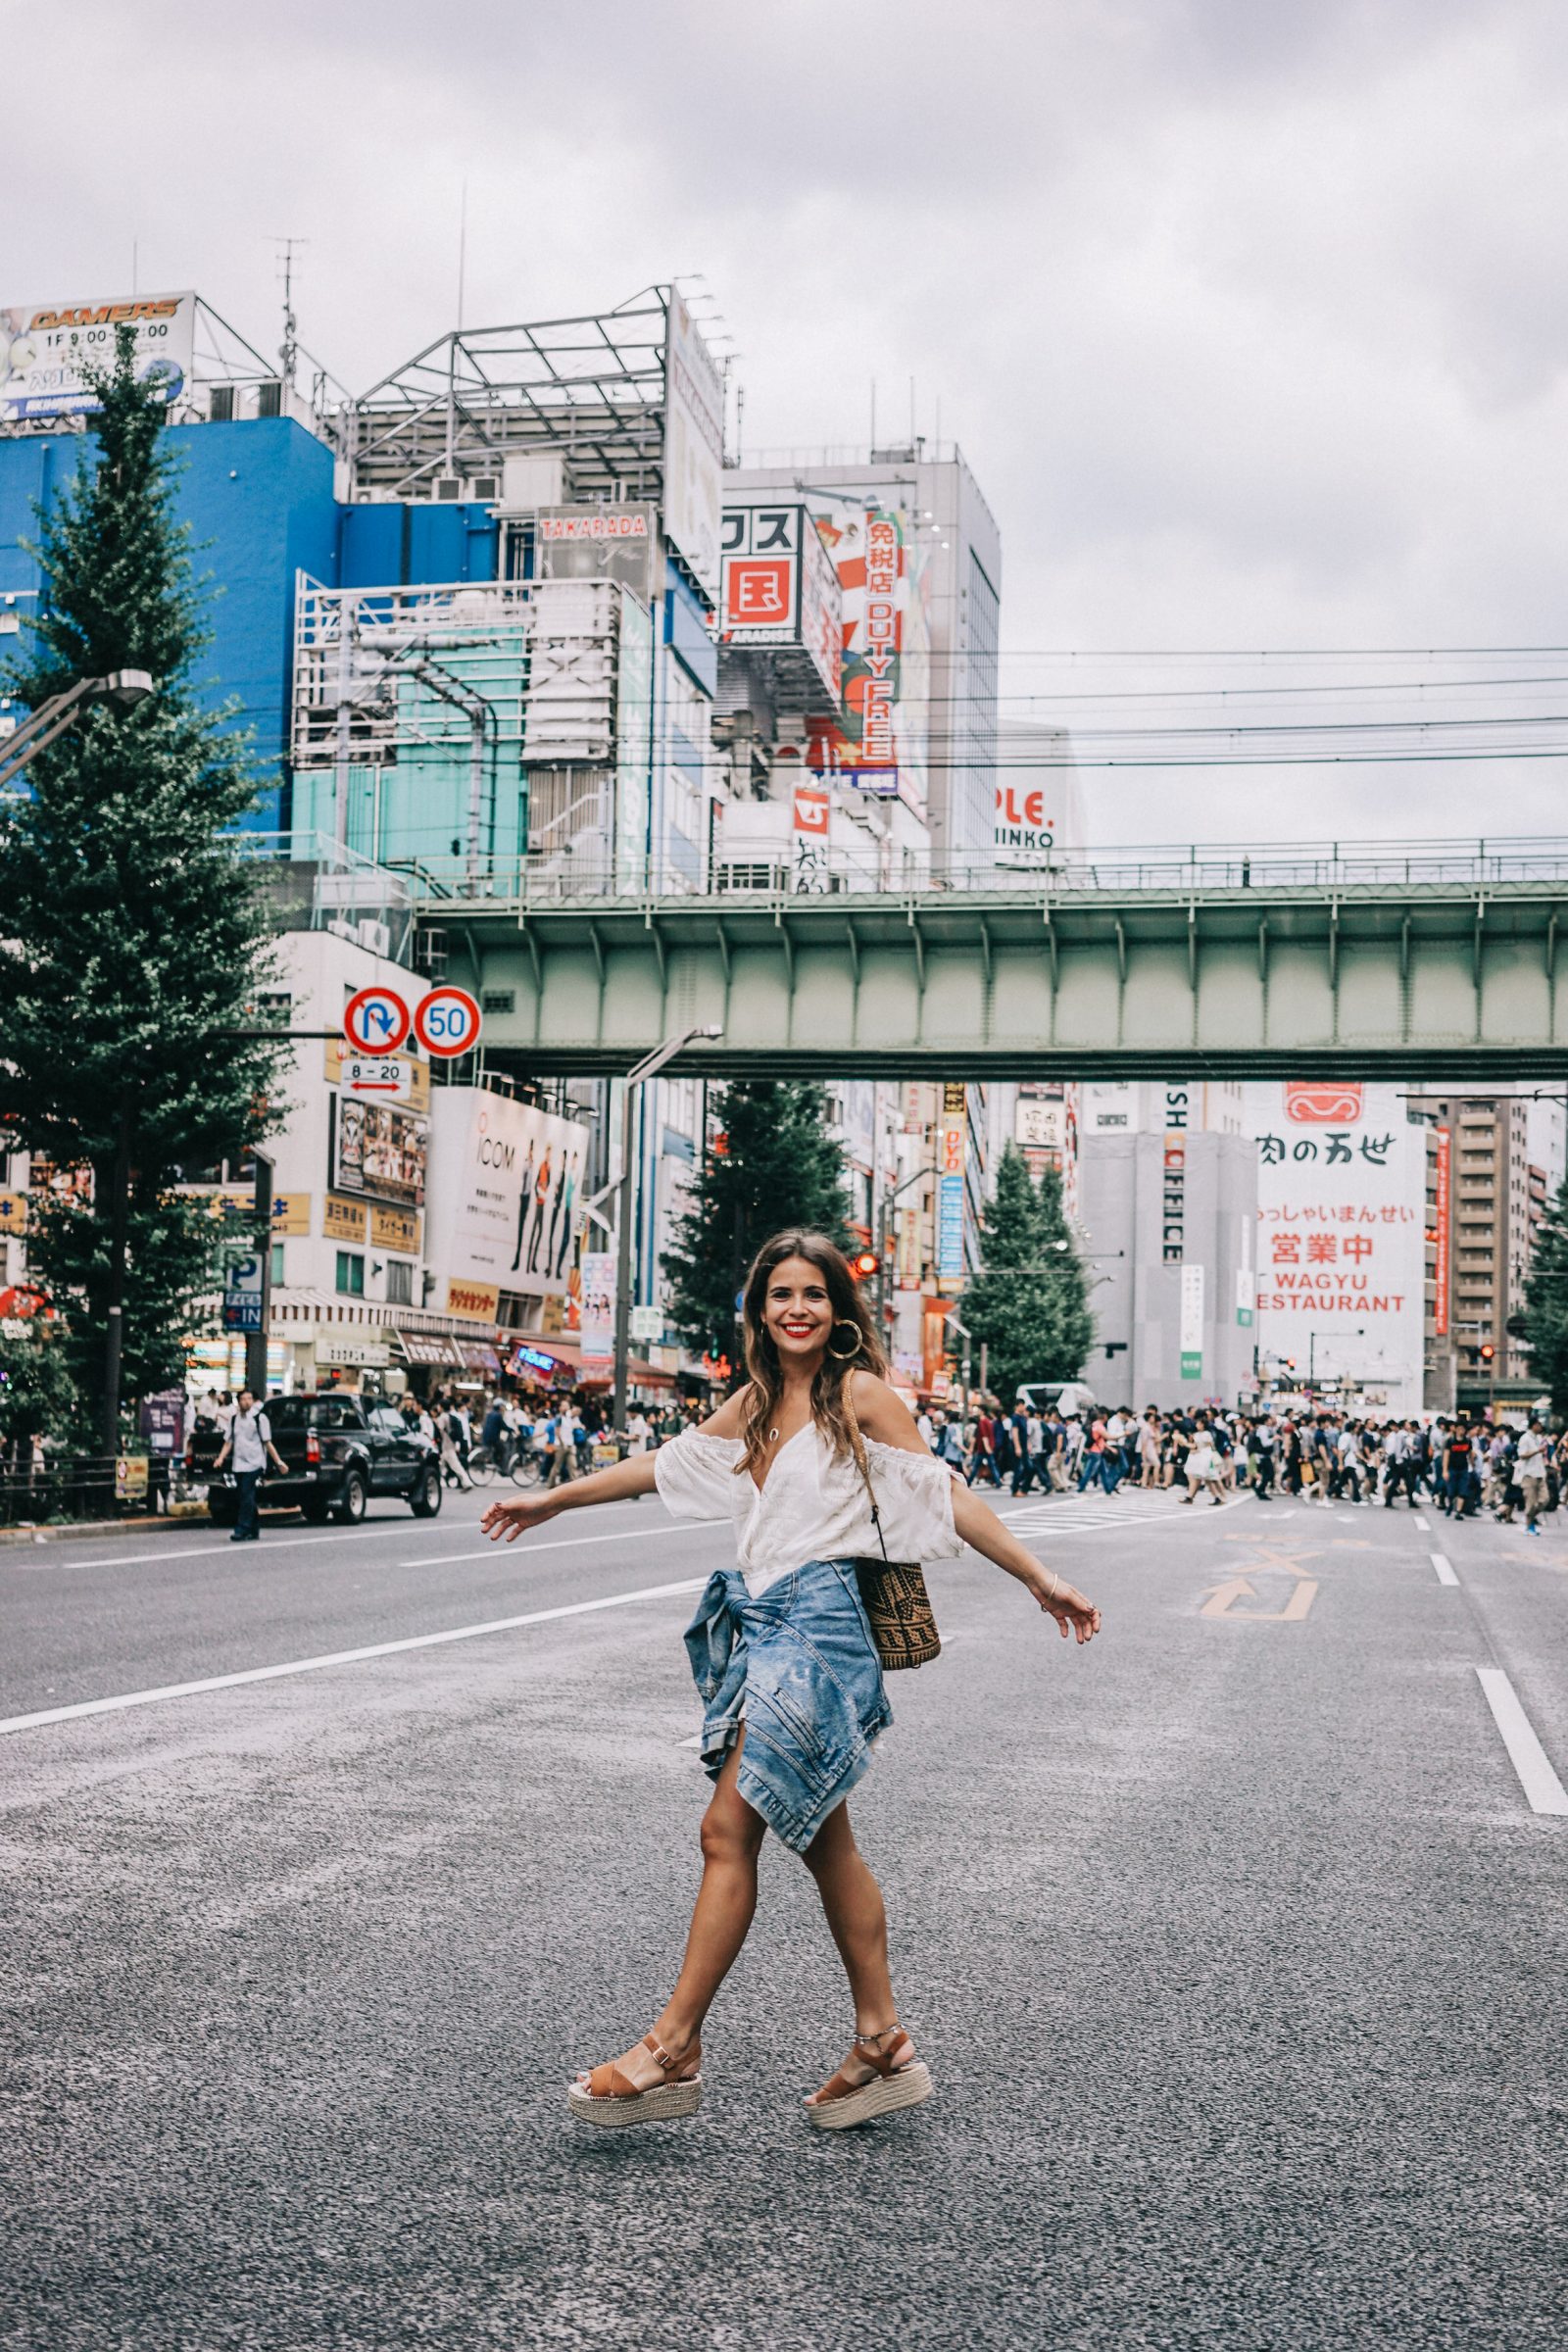 tokyo_travel_guide-outfit-collage_vintage-street_style-lovers_and_friends_jumpsuit-white_outfit-espadrilles-backpack-levis_denim_jacket-akihabara-121